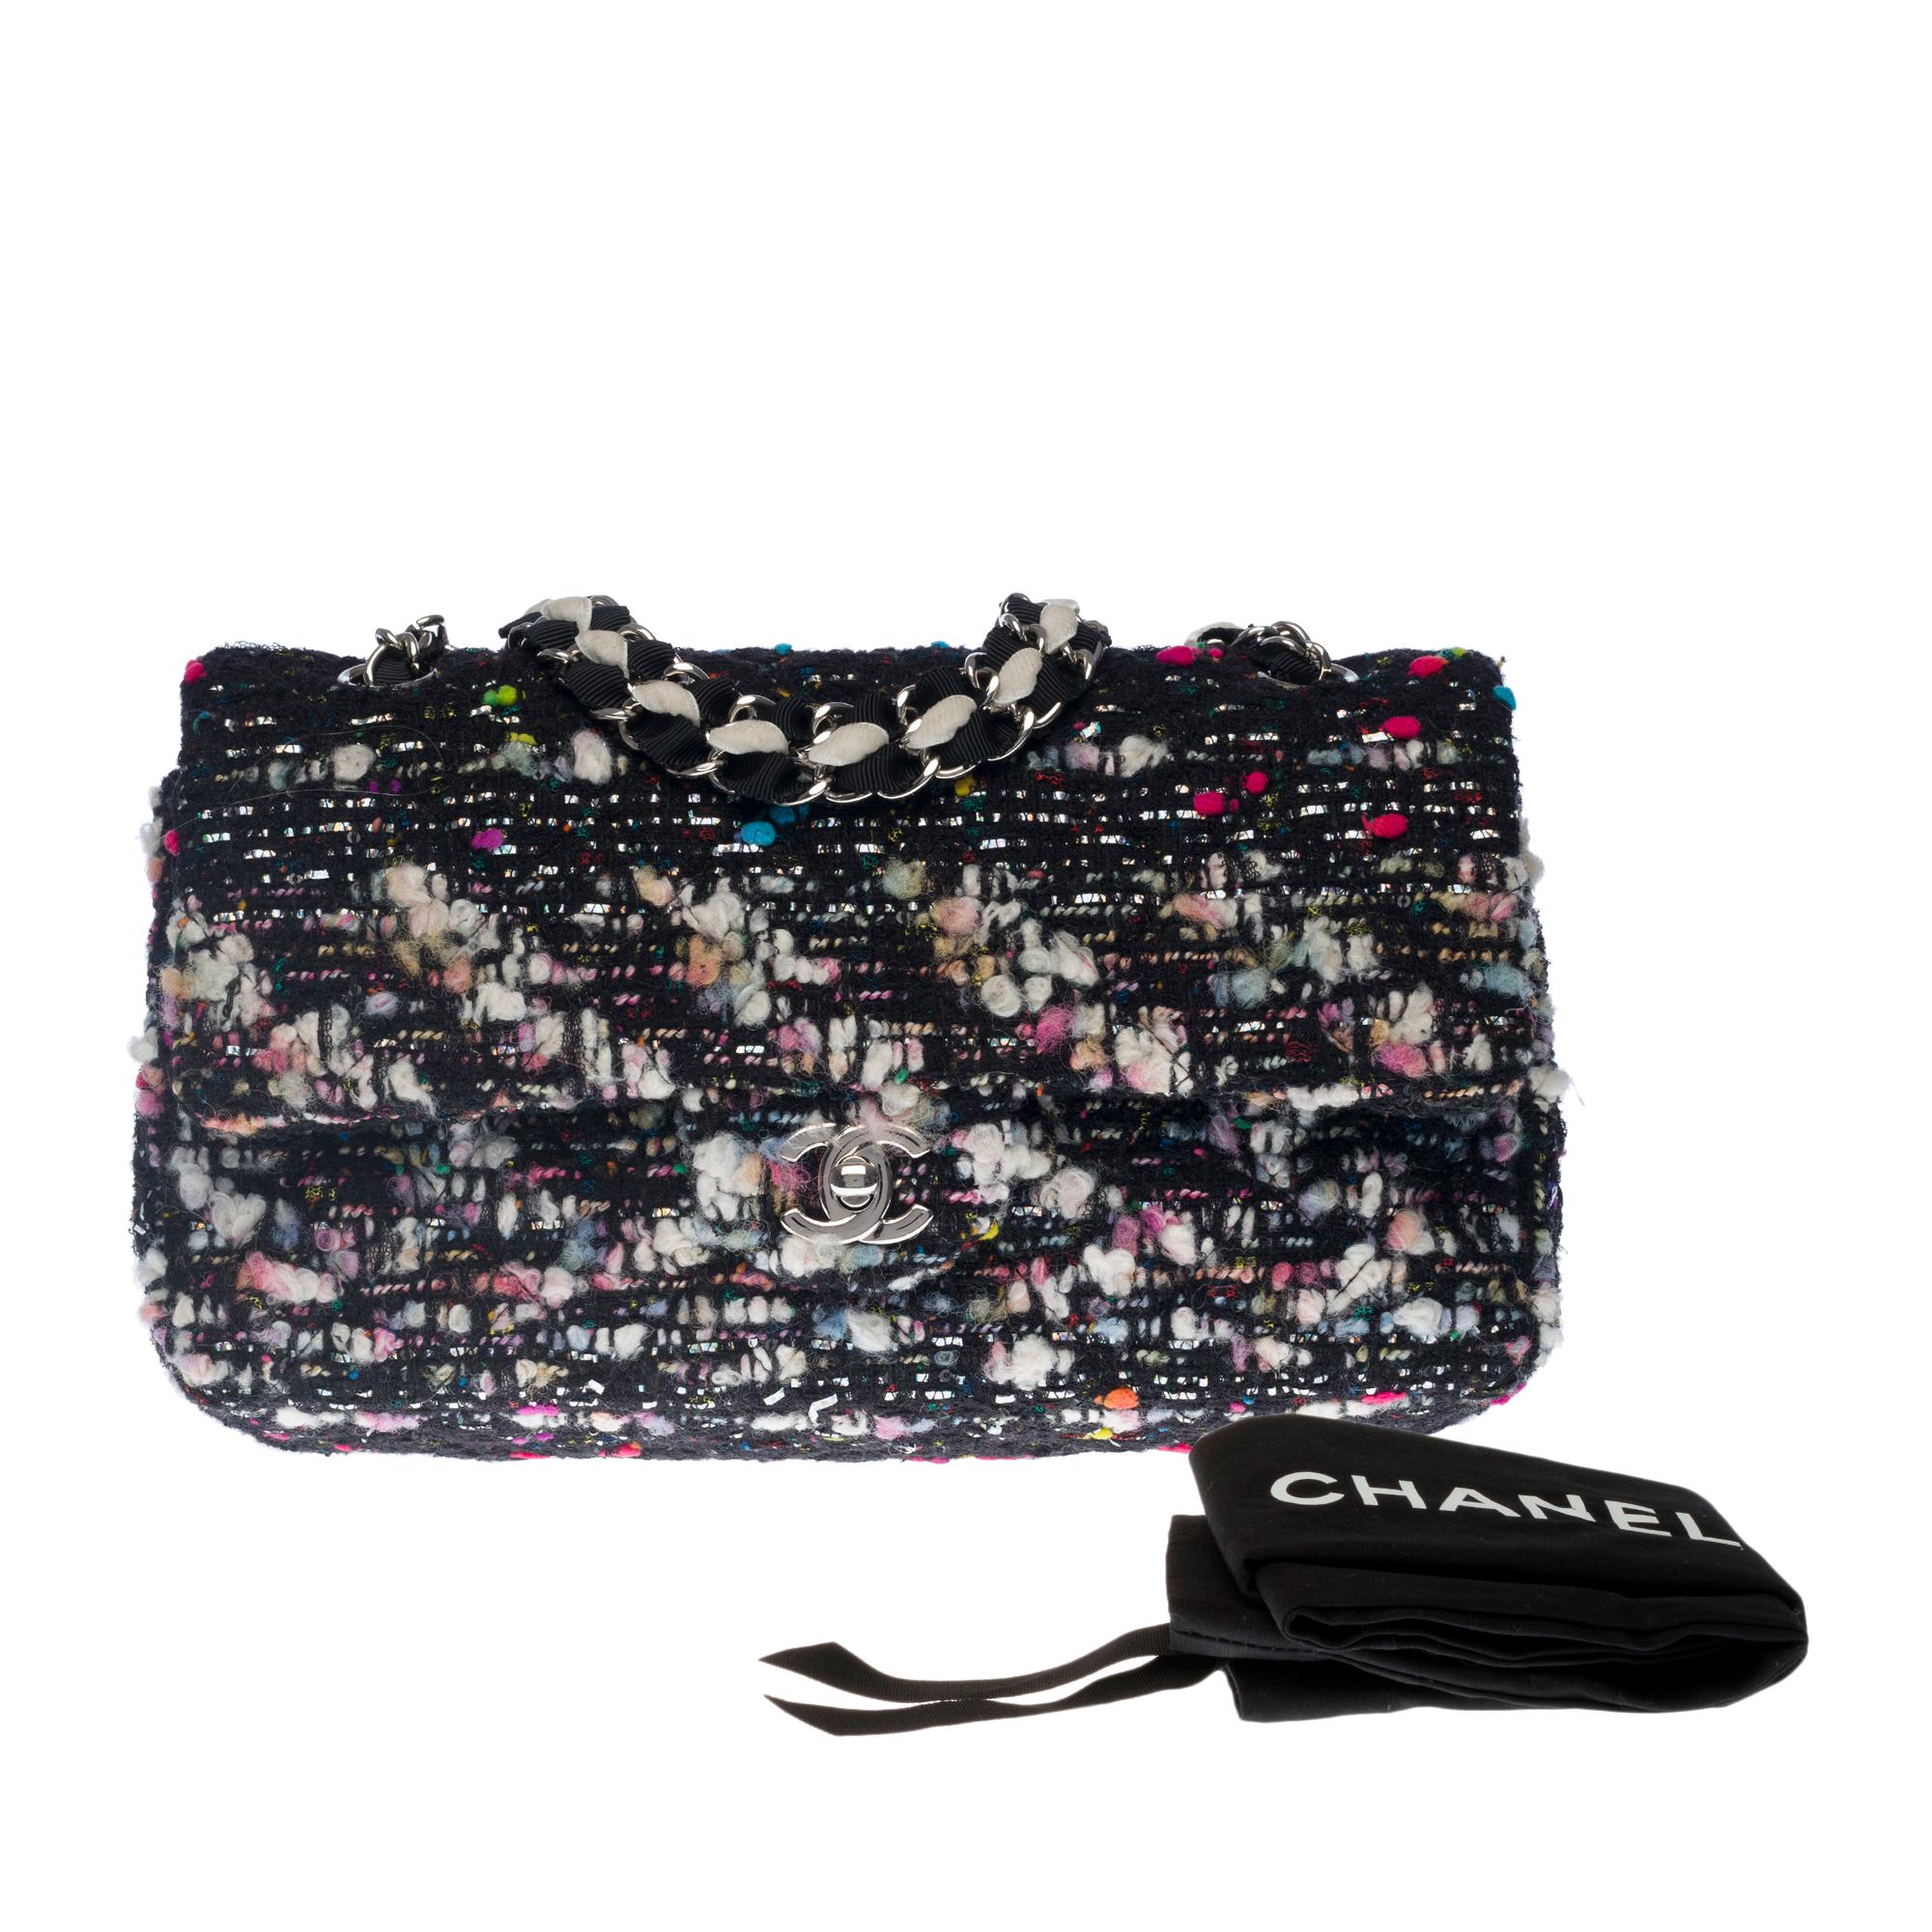 Limited Edition Chanel Timeless Shoulder bag in Multicolor Tweed with SHW 7